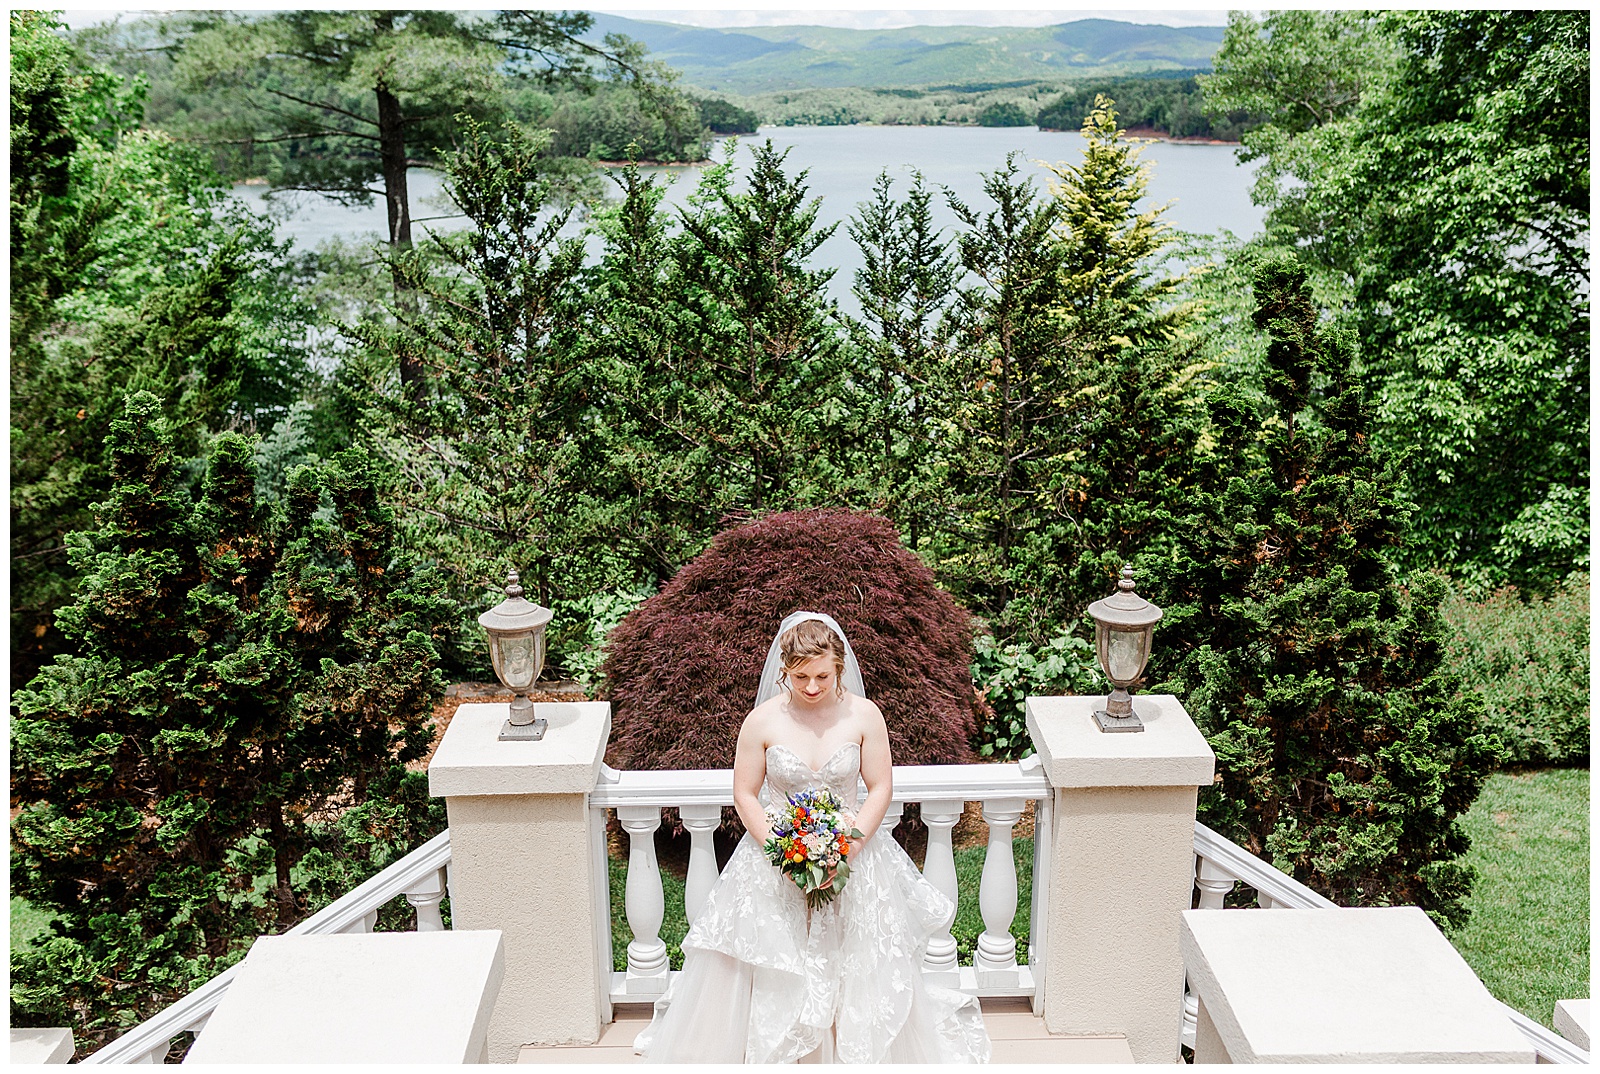 gorgeous scenic lakehouse white mansion location 👰 Bride: lace wedding dress + veil 💐 Colorful orange and blue bouquet 📸 Outdoorsy Lake and Mountain Bridal Session with Julia | Kevyn Dixon Photography